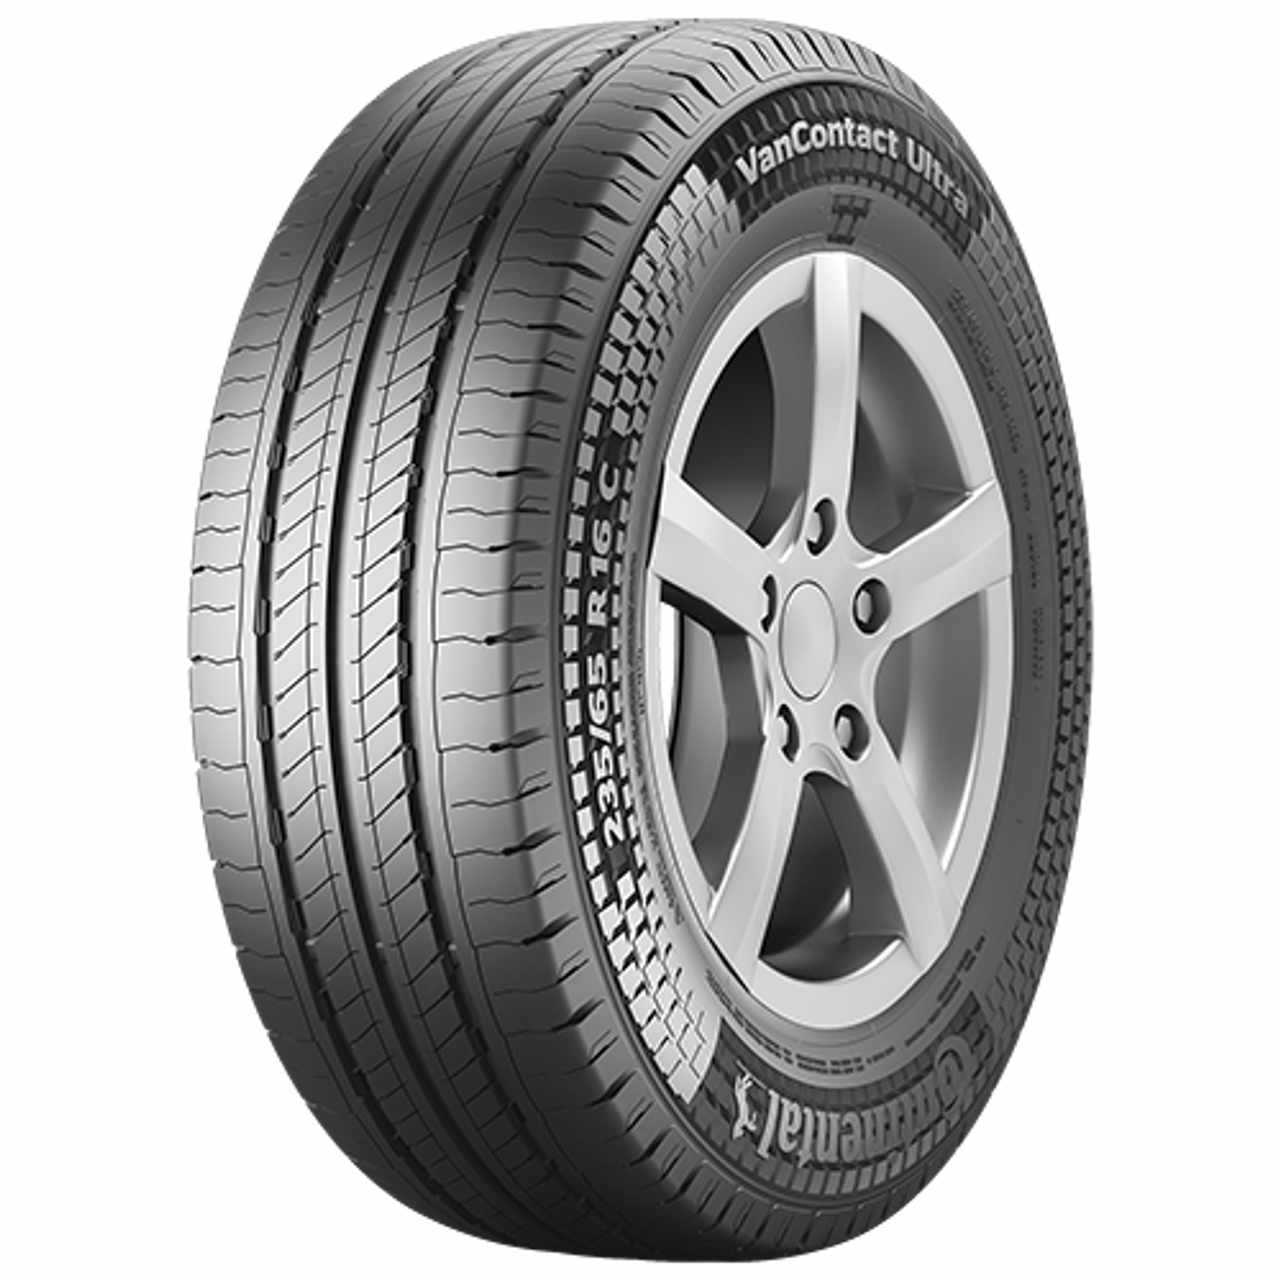 CONTINENTAL VANCONTACT ULTRA 205/75R16C 113R BSW